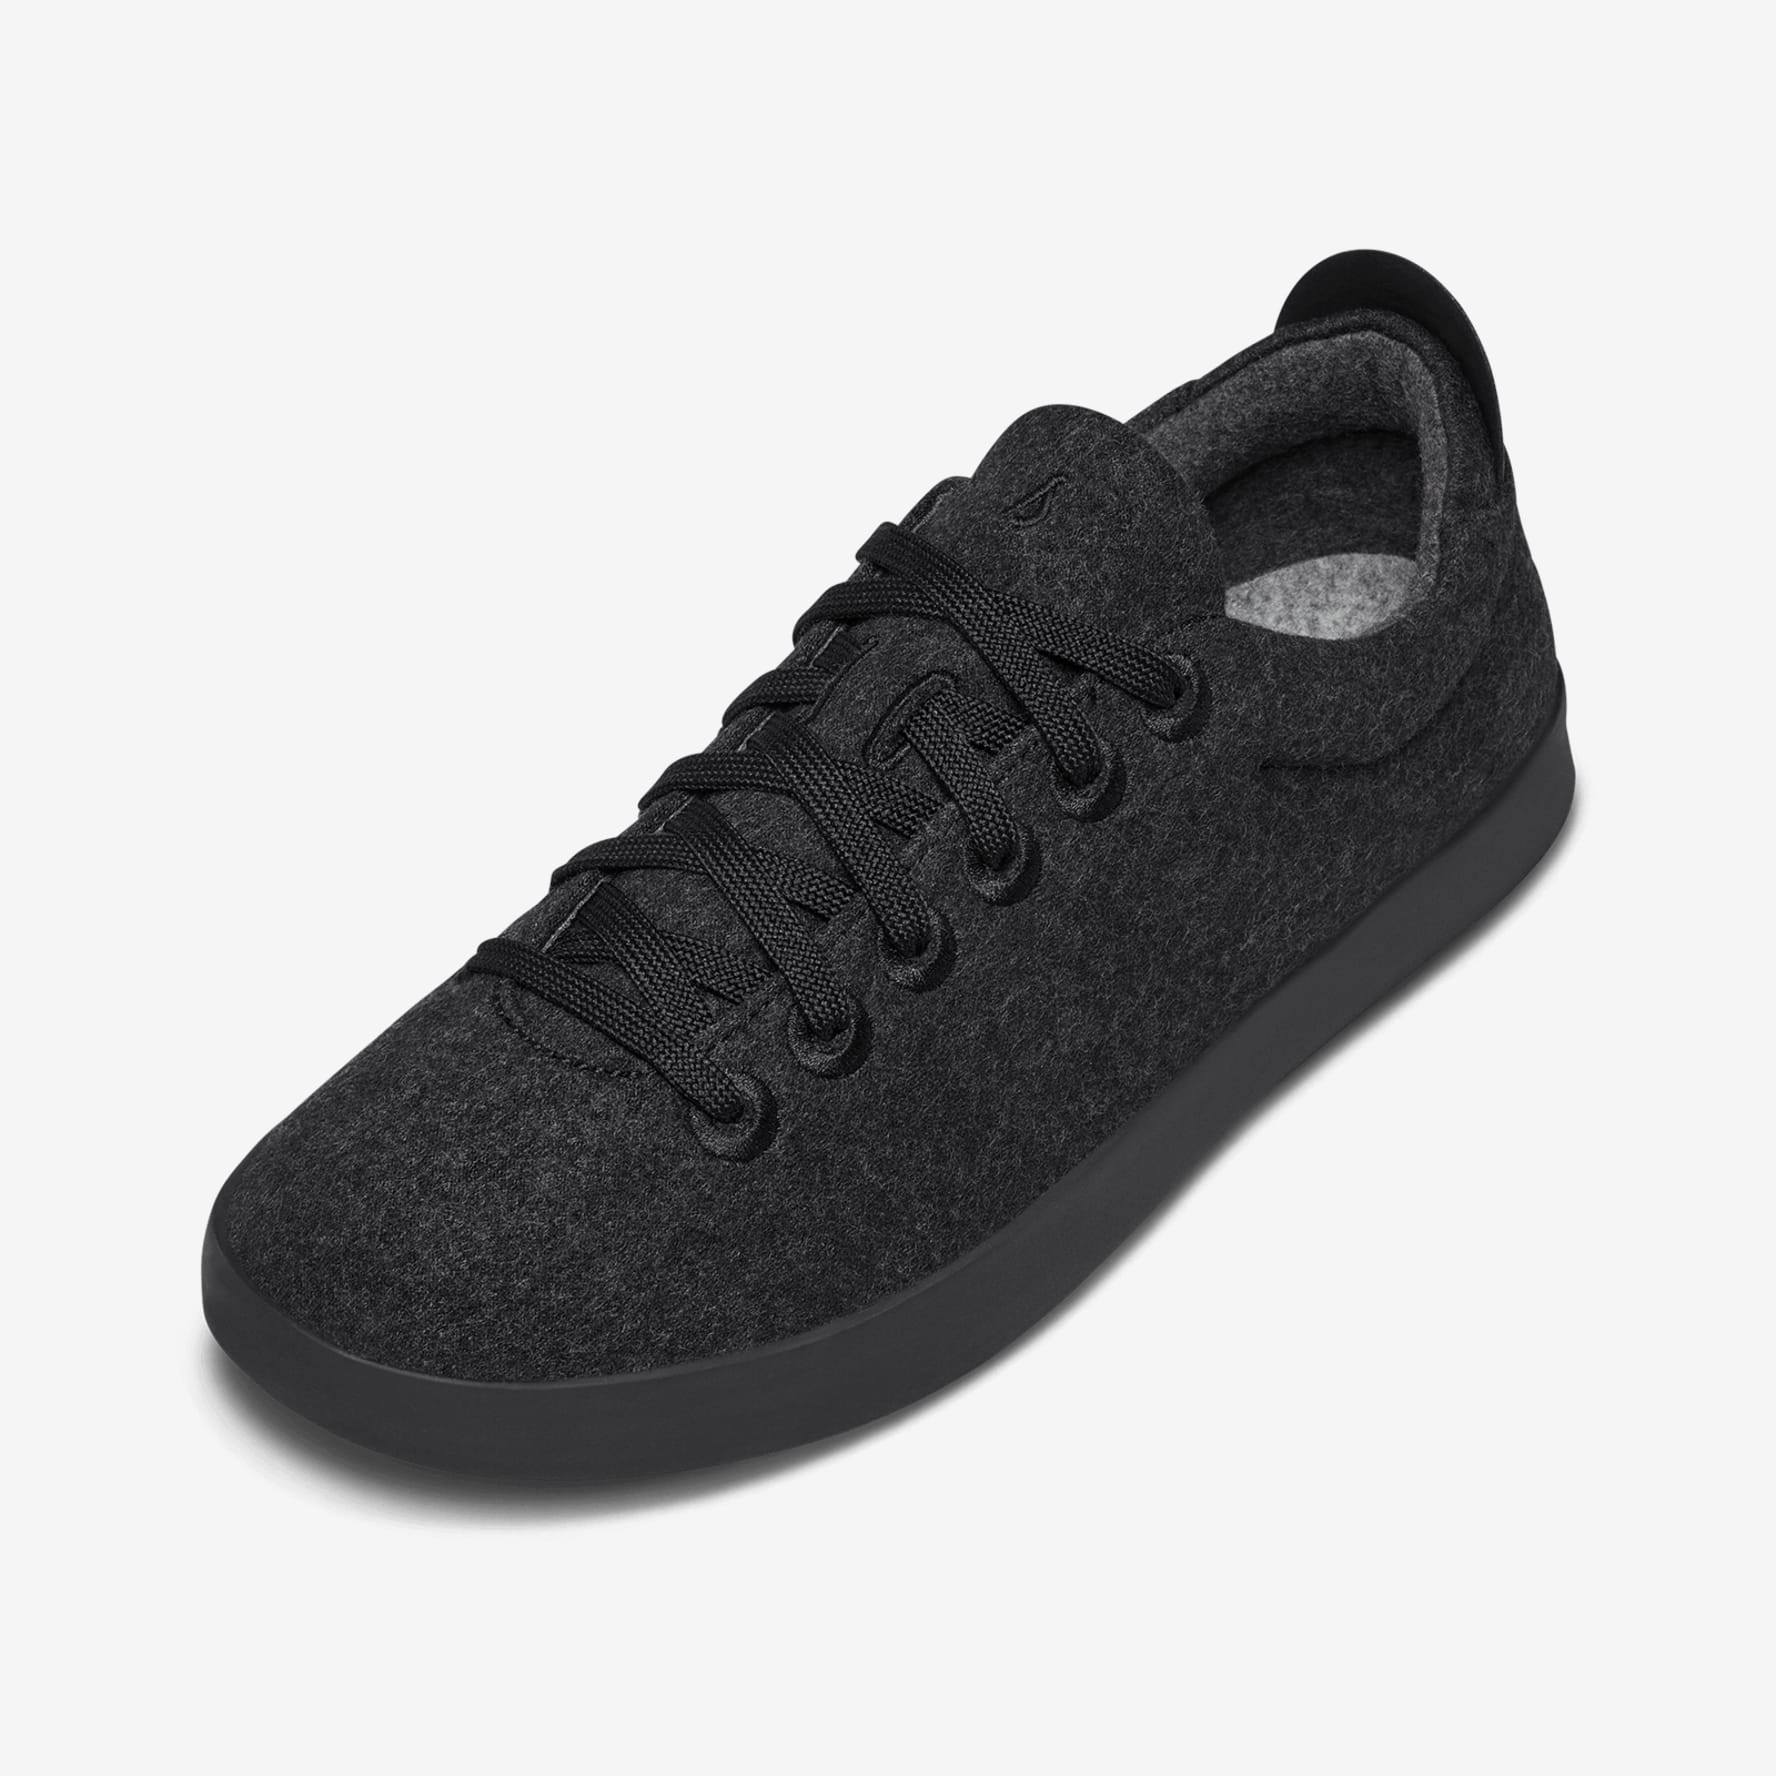 Men's Tree Pipers Luna (White Sole) Trending Sneakers,, 40% OFF